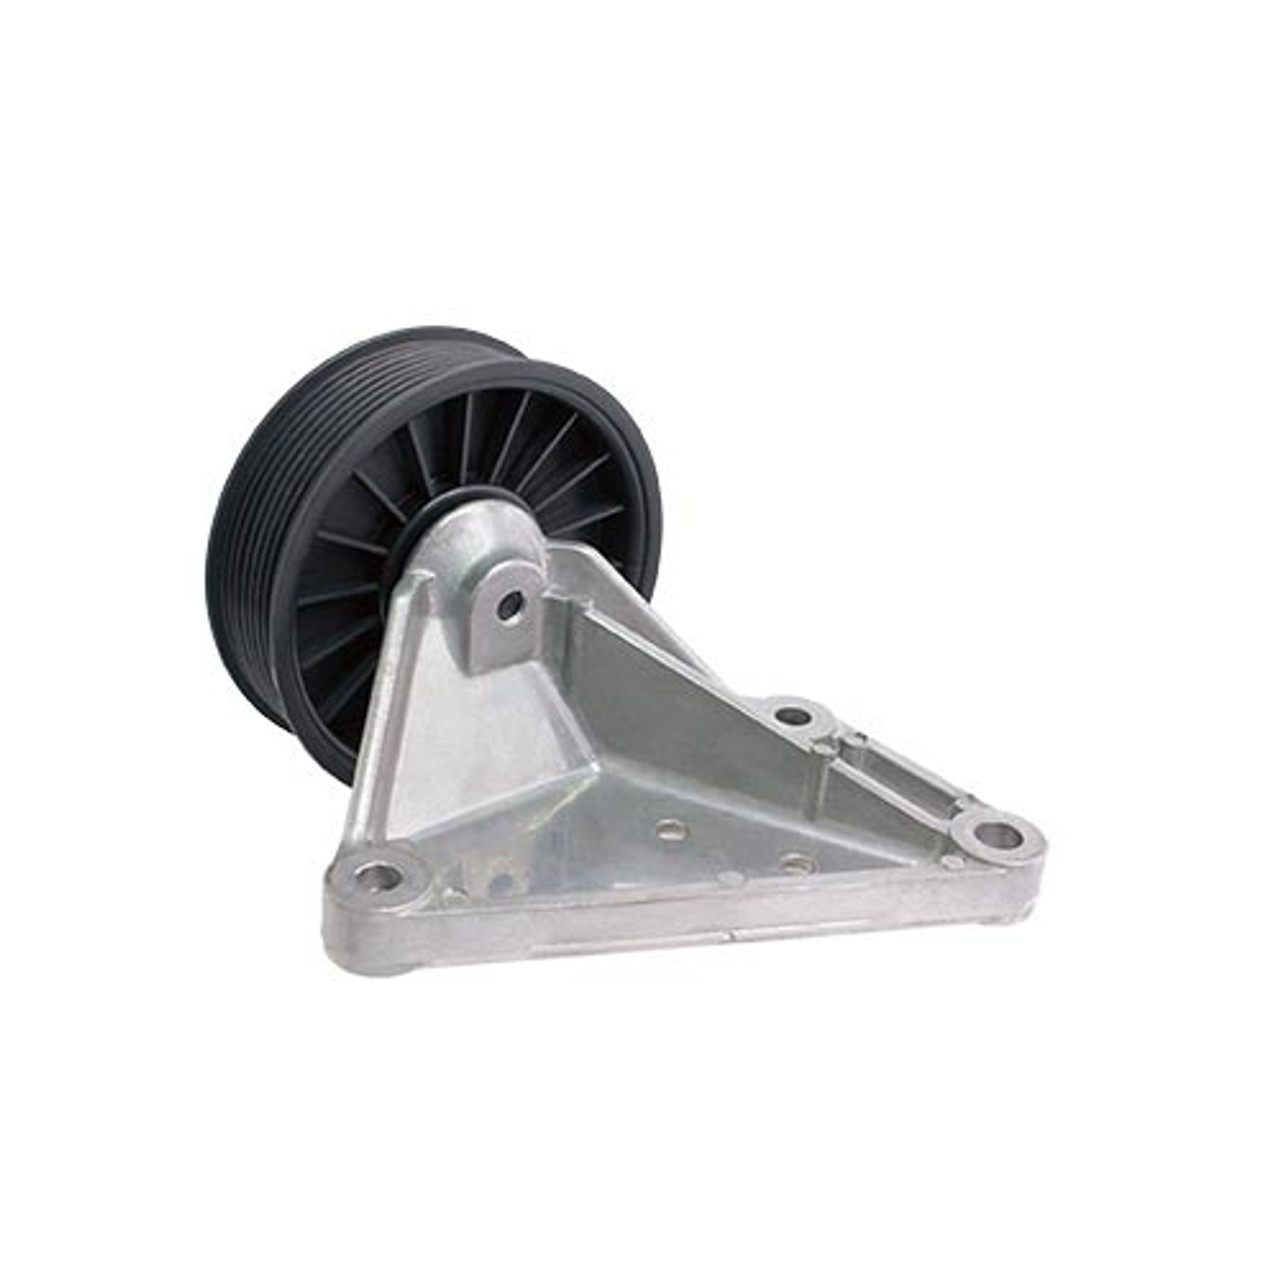 Dayco 6.7L Powerstroke Pulley -Upper